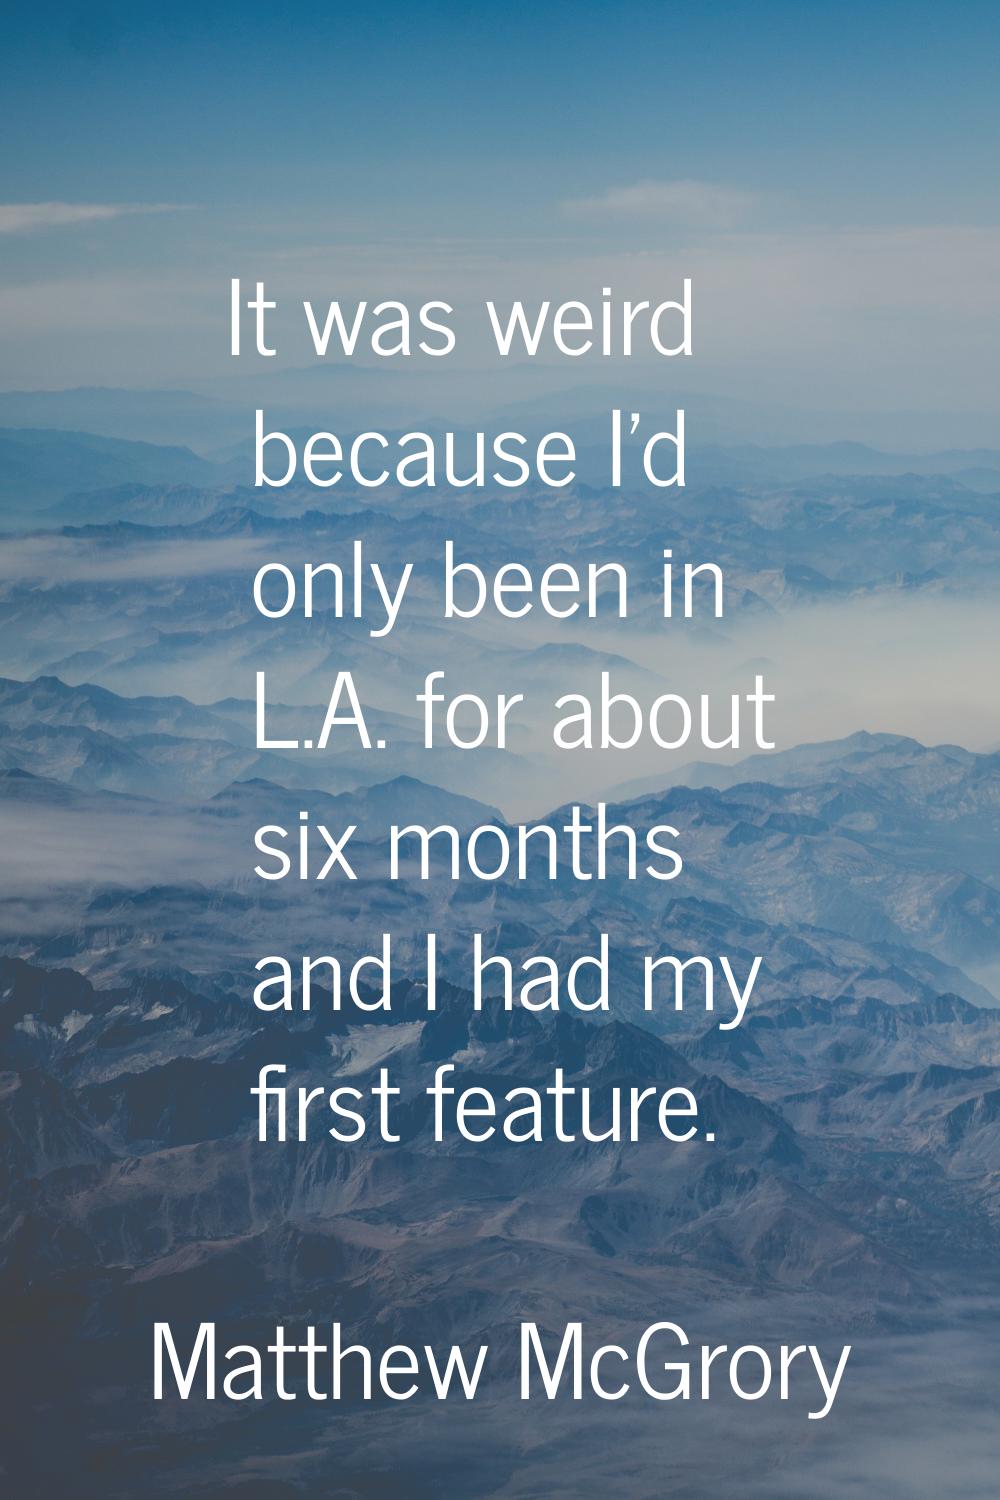 It was weird because I'd only been in L.A. for about six months and I had my first feature.